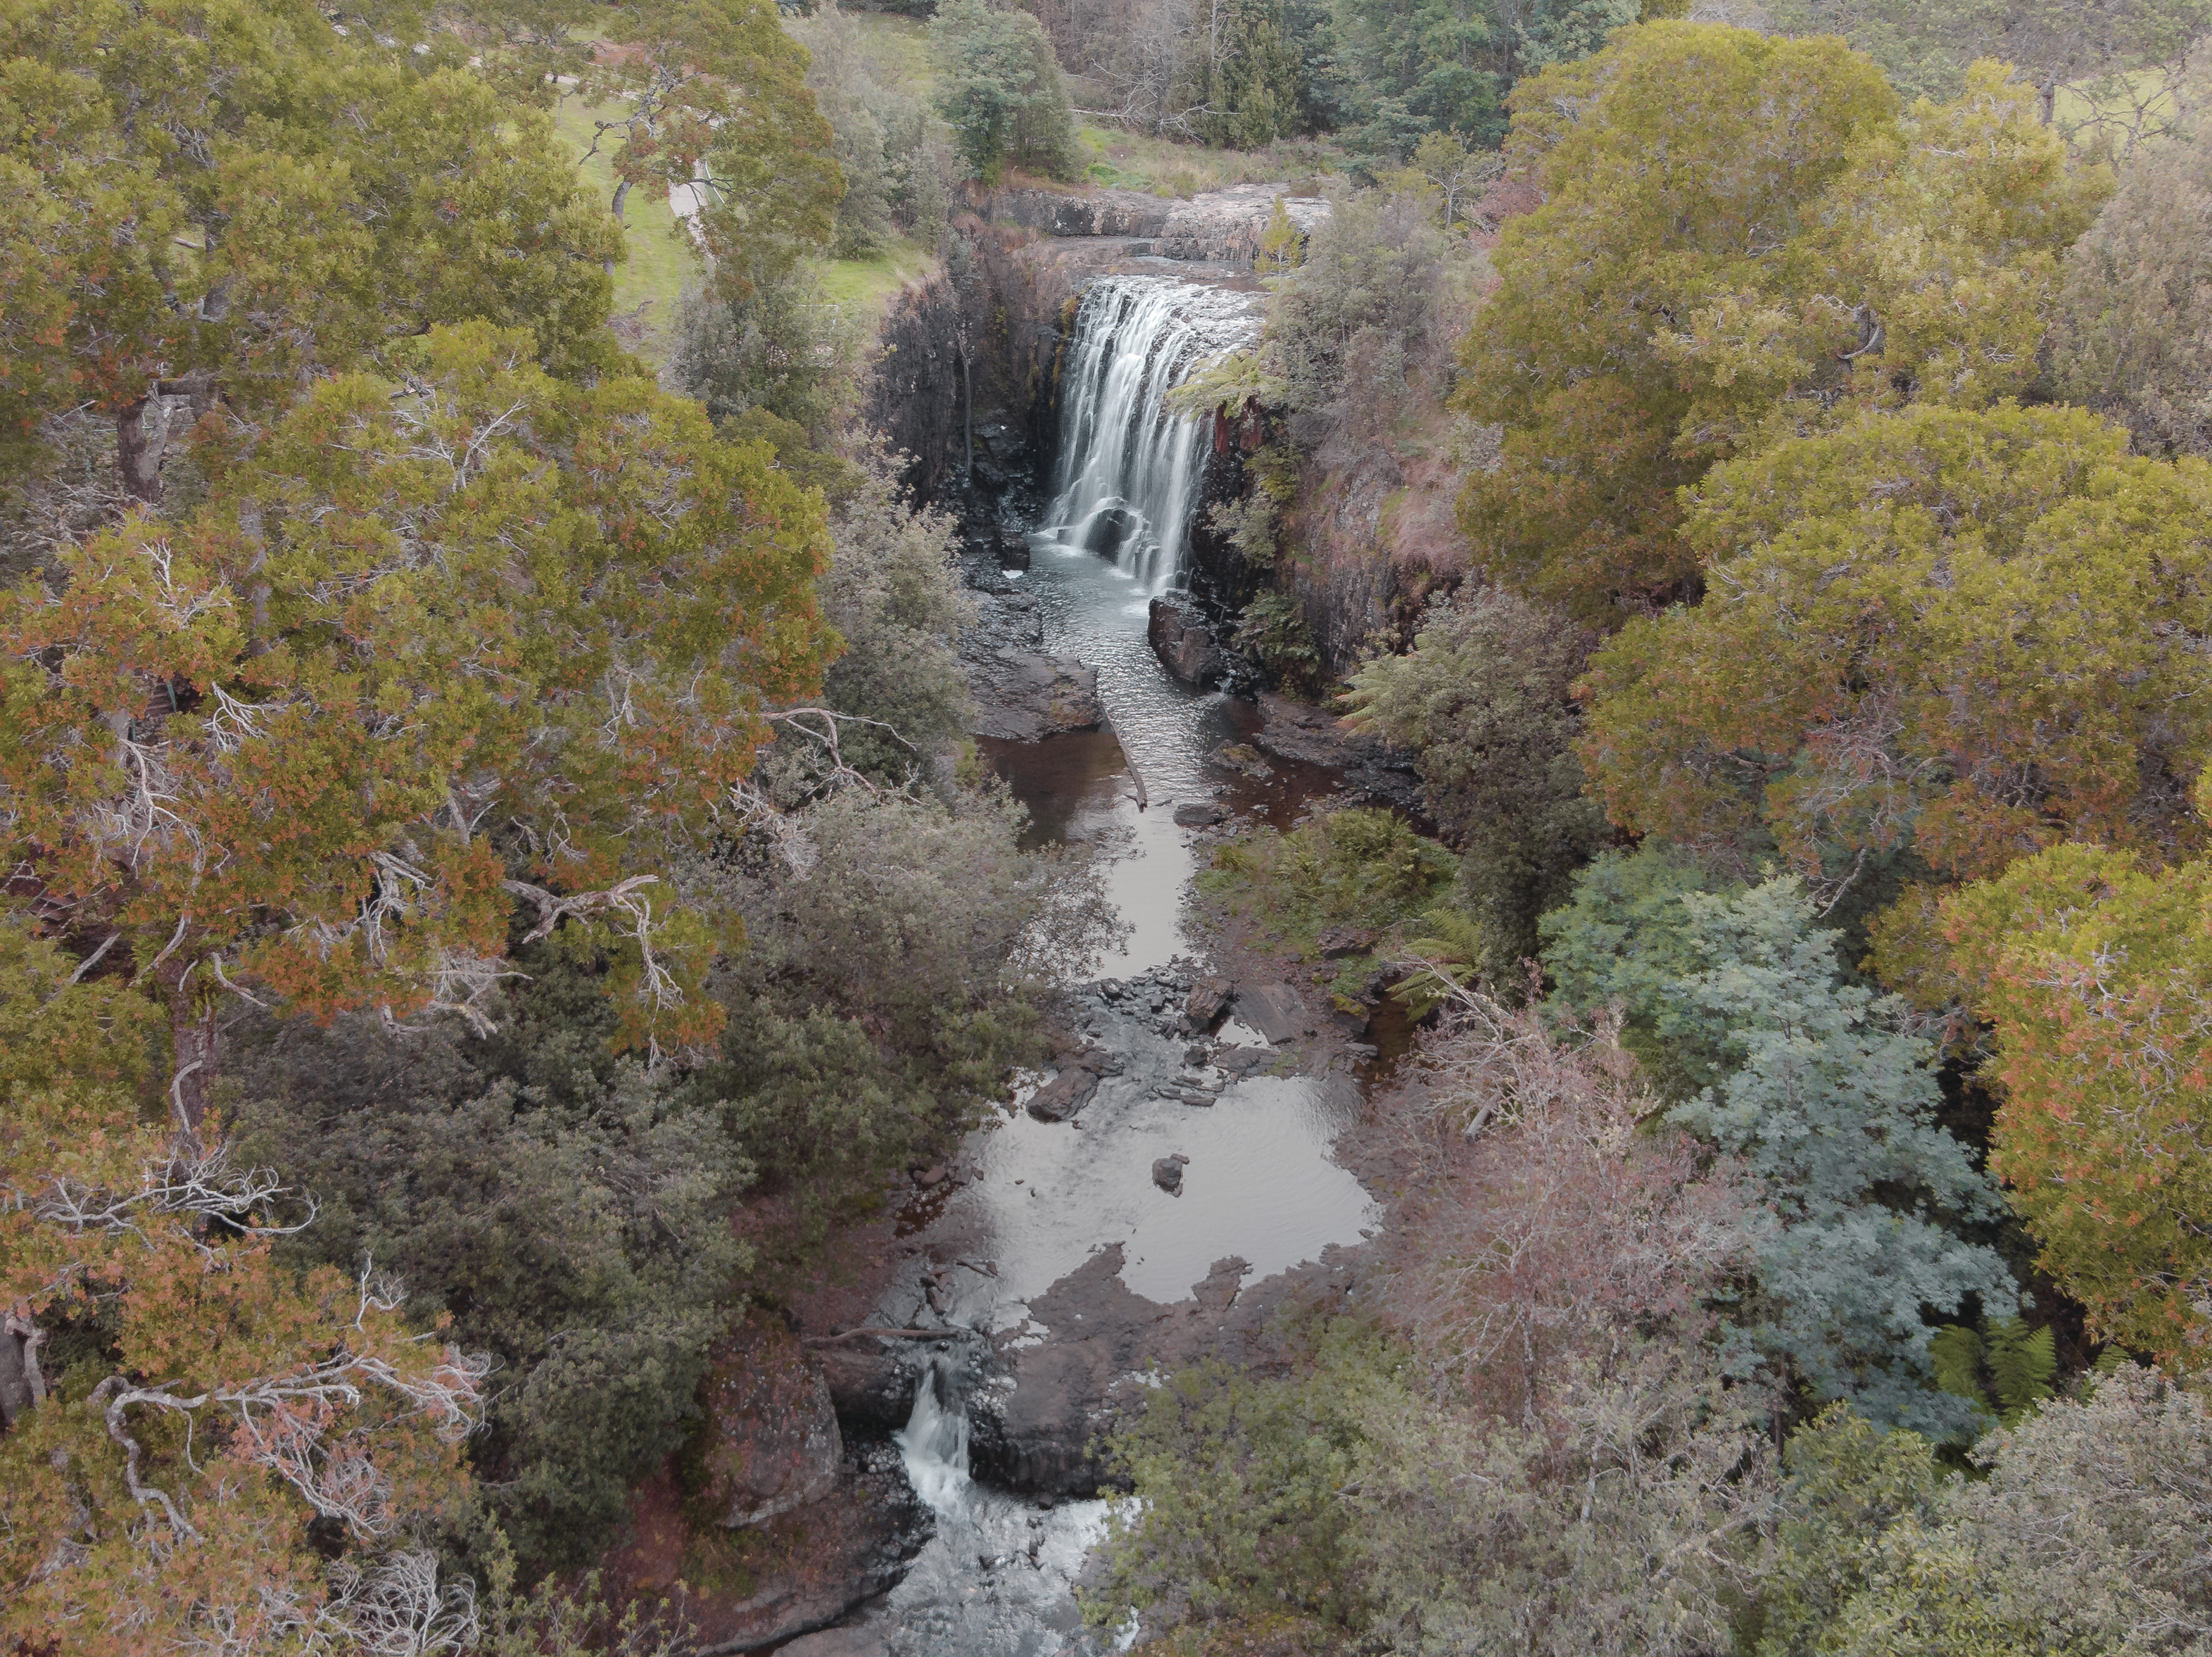 Guide Falls Reserve, a beautiful place for picnic or BBQ. Surrounded by lush trees.